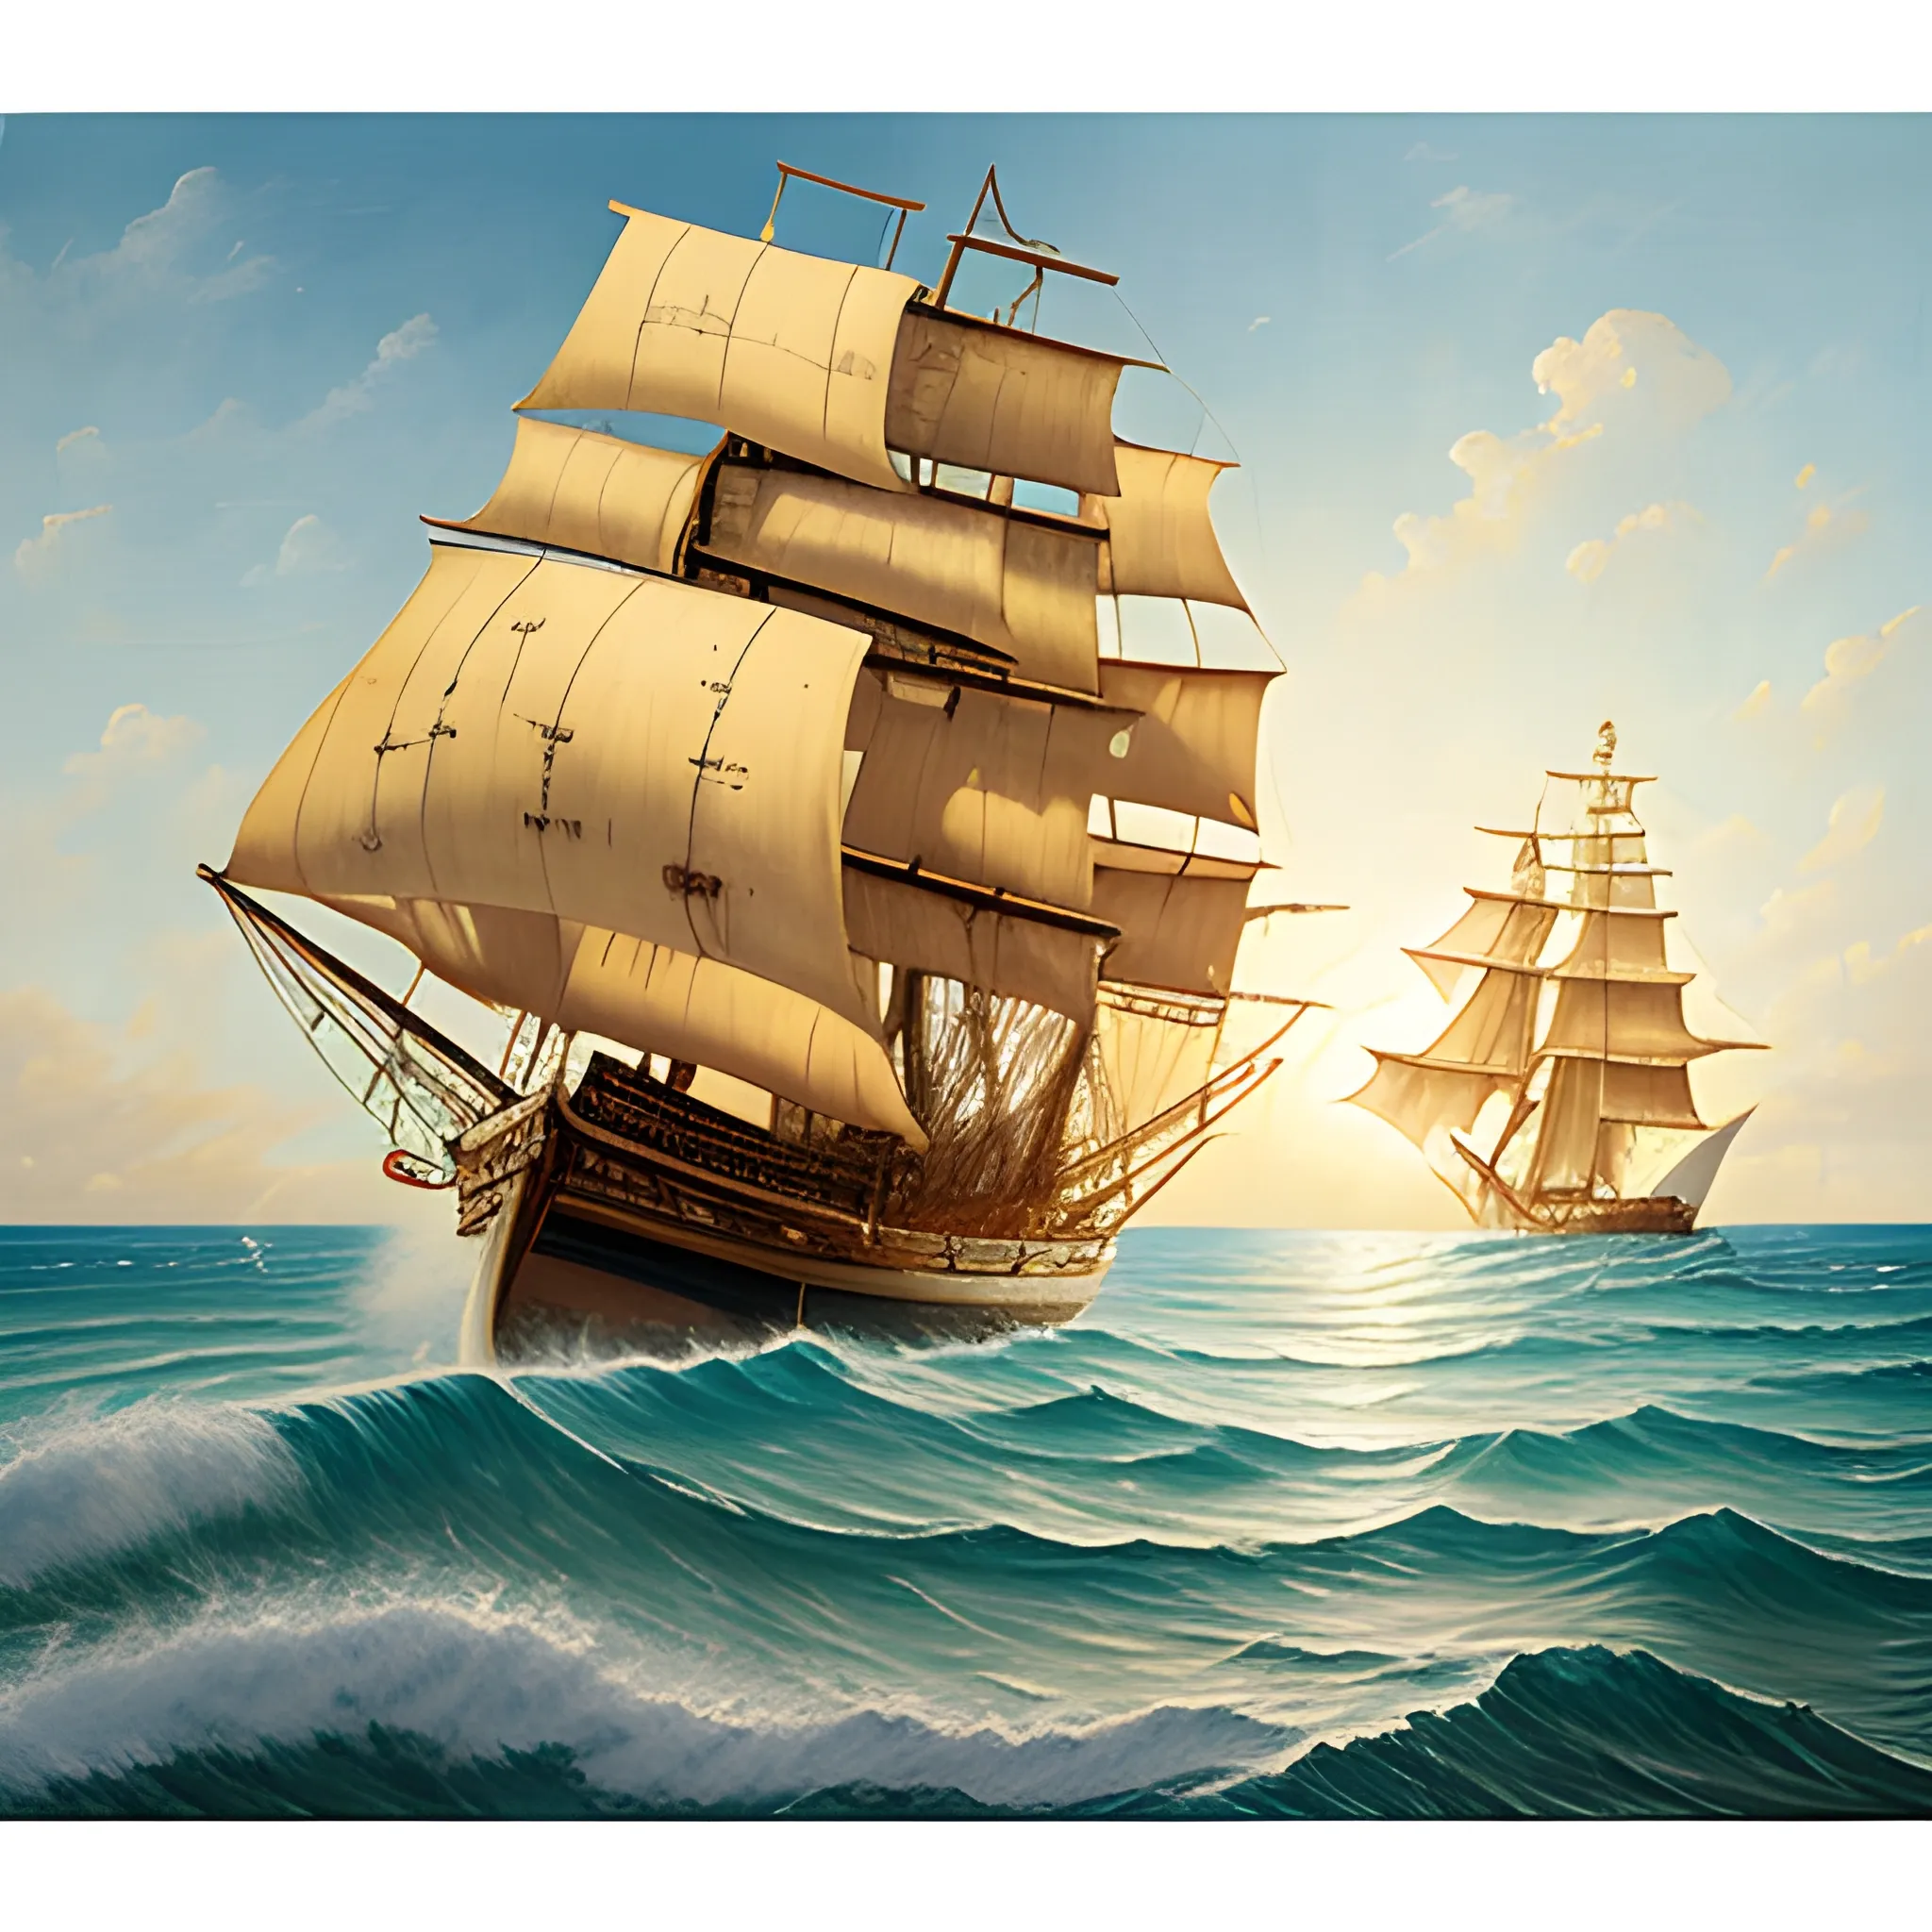 A pirate ship sailing away to the left in a wavy sea, thick burlap sails blown with the wind, large ship, Wonderful painting, Akihito Yoshida oil painting style, highly detailed,, Oil Painting, Caribbean treas and beach on the Left. 